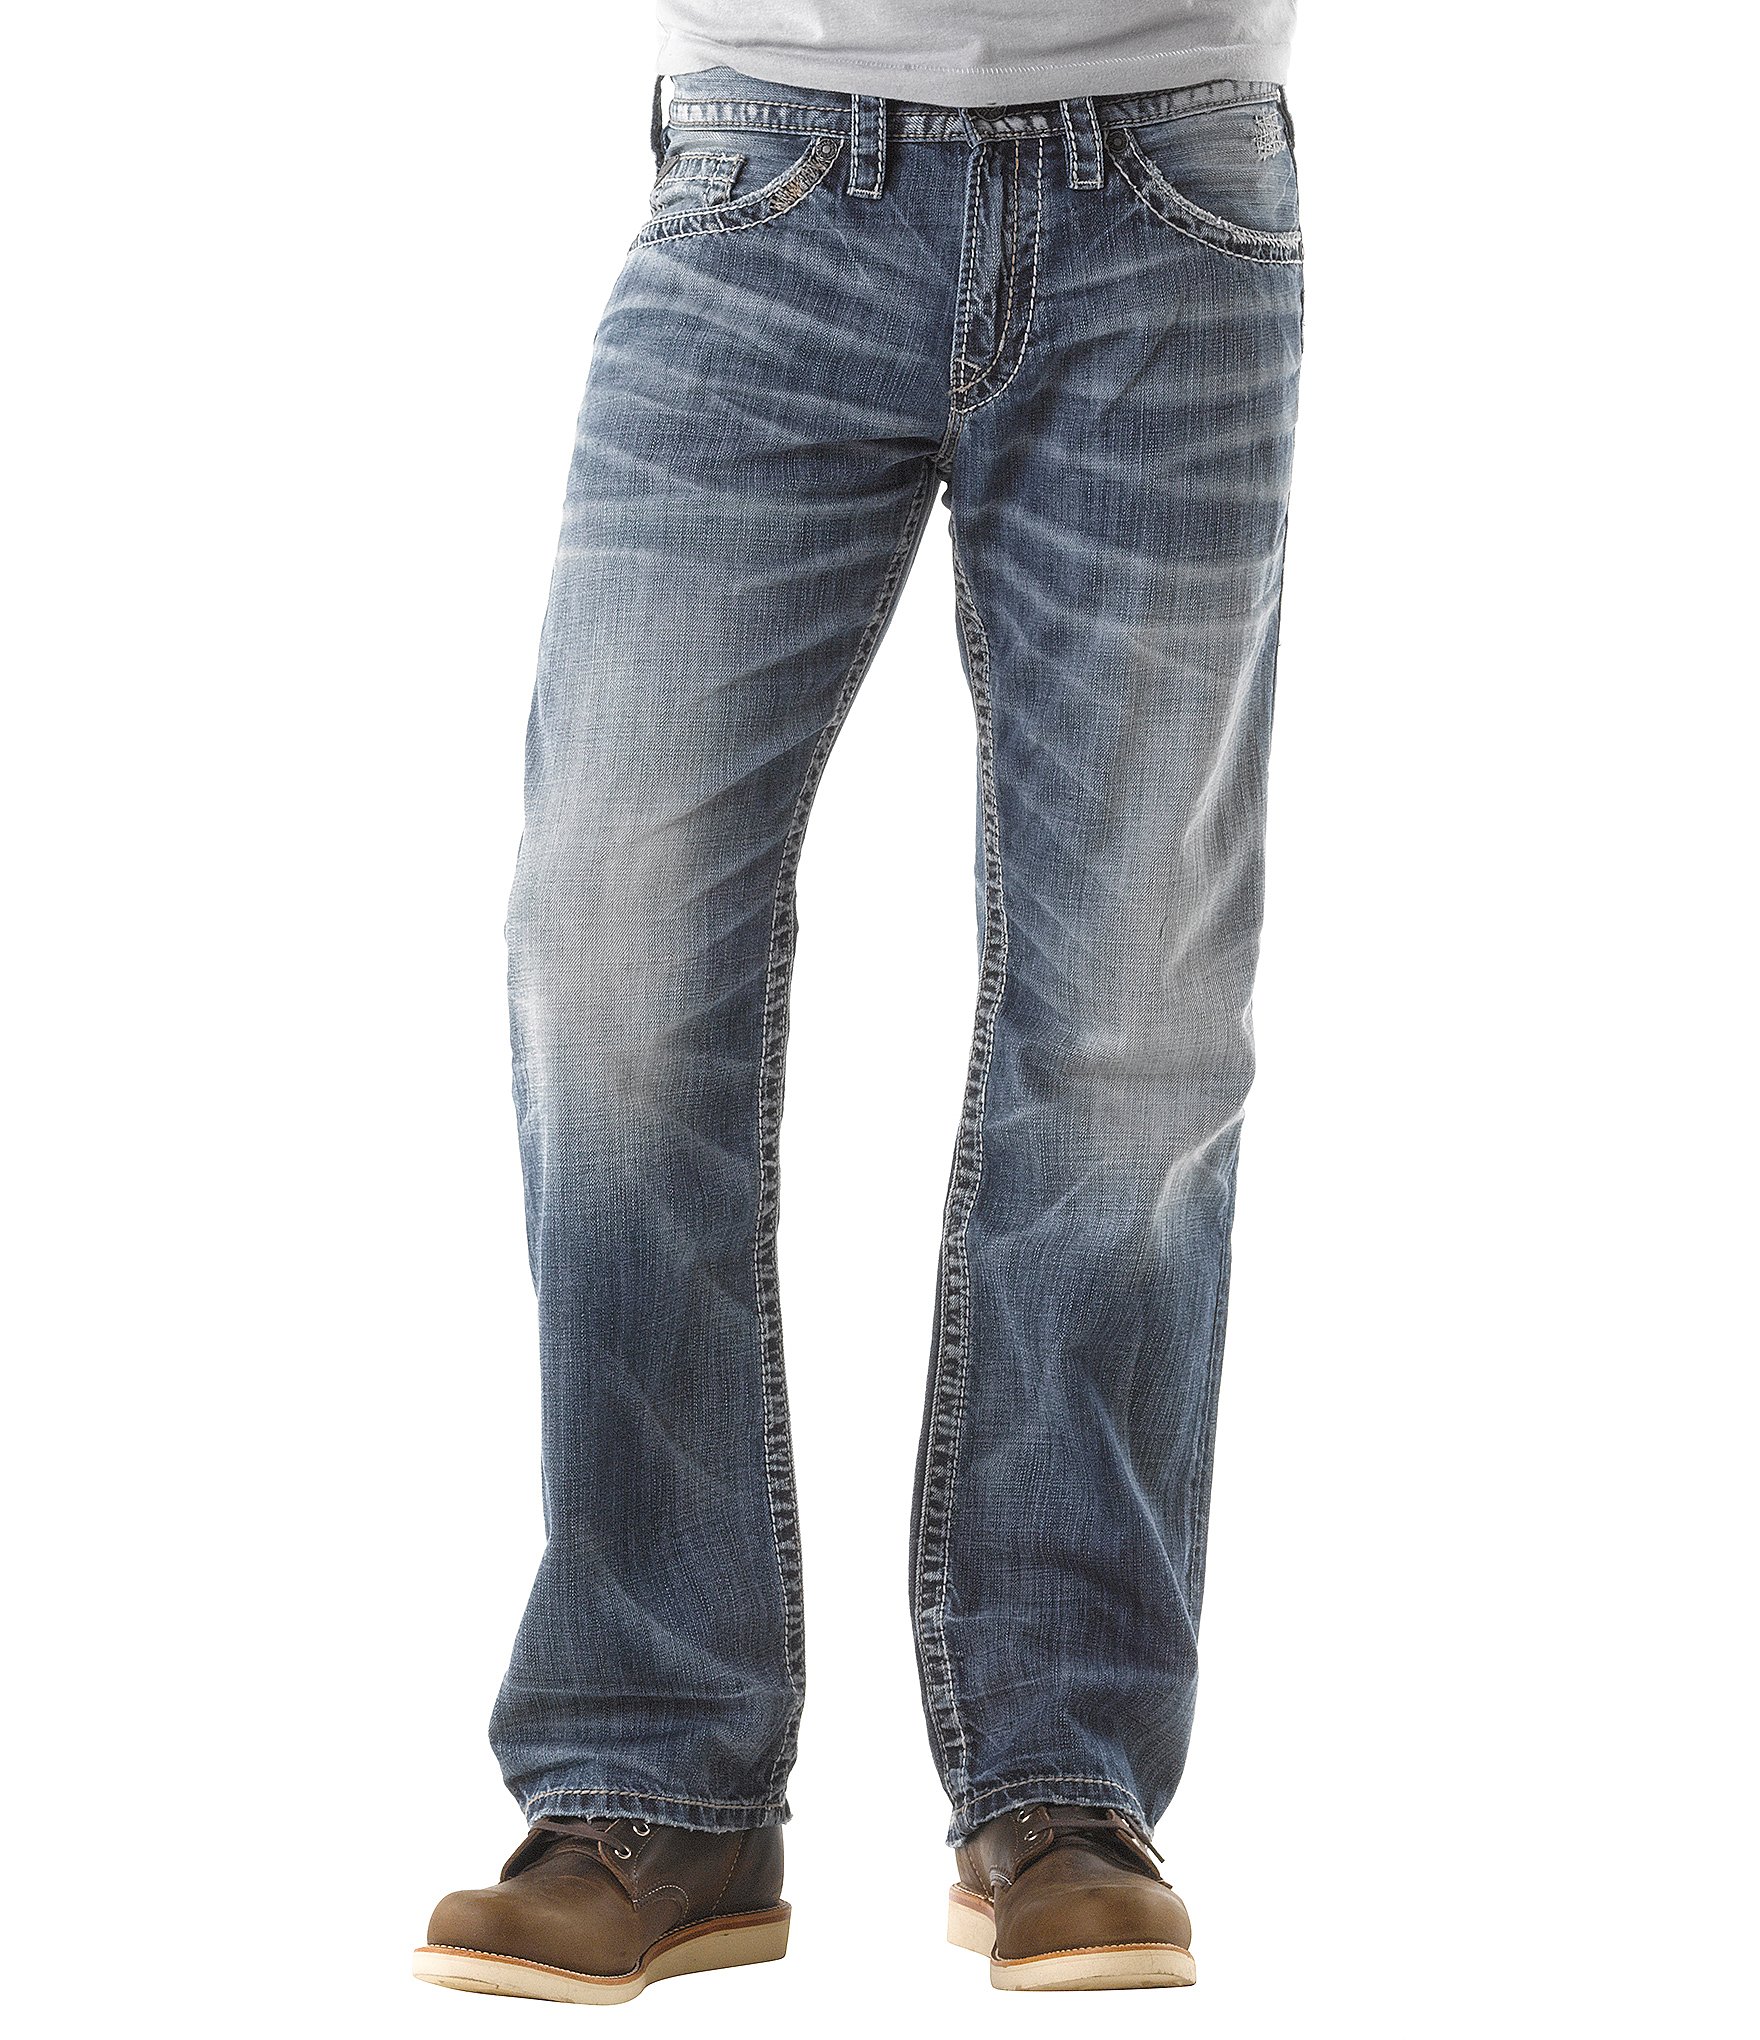 silver bootcut jeans mens